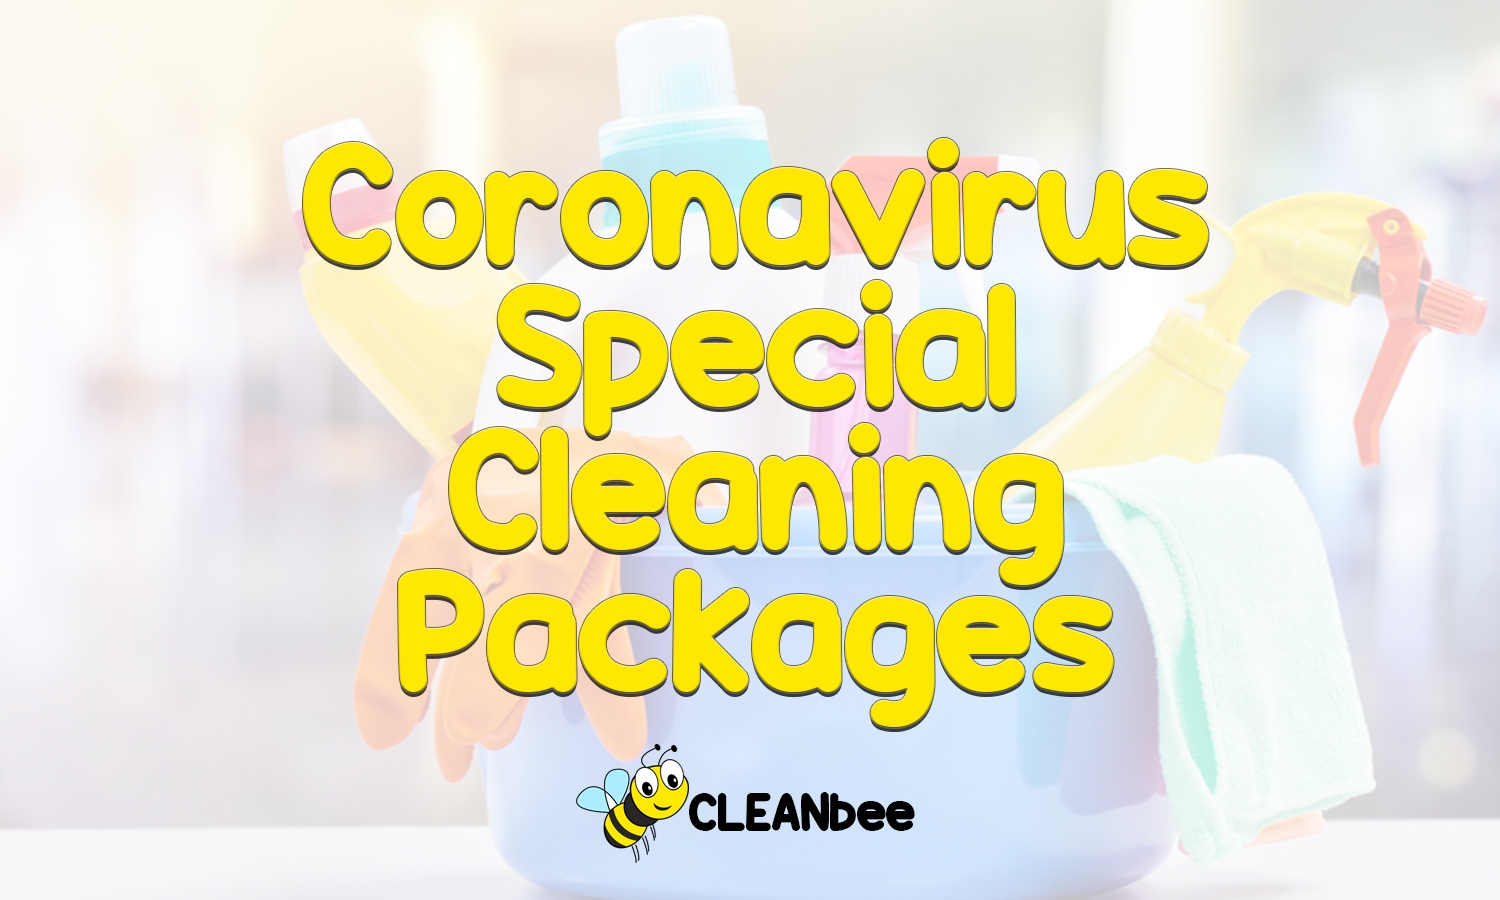 Coronavirus Special Cleaning Packages